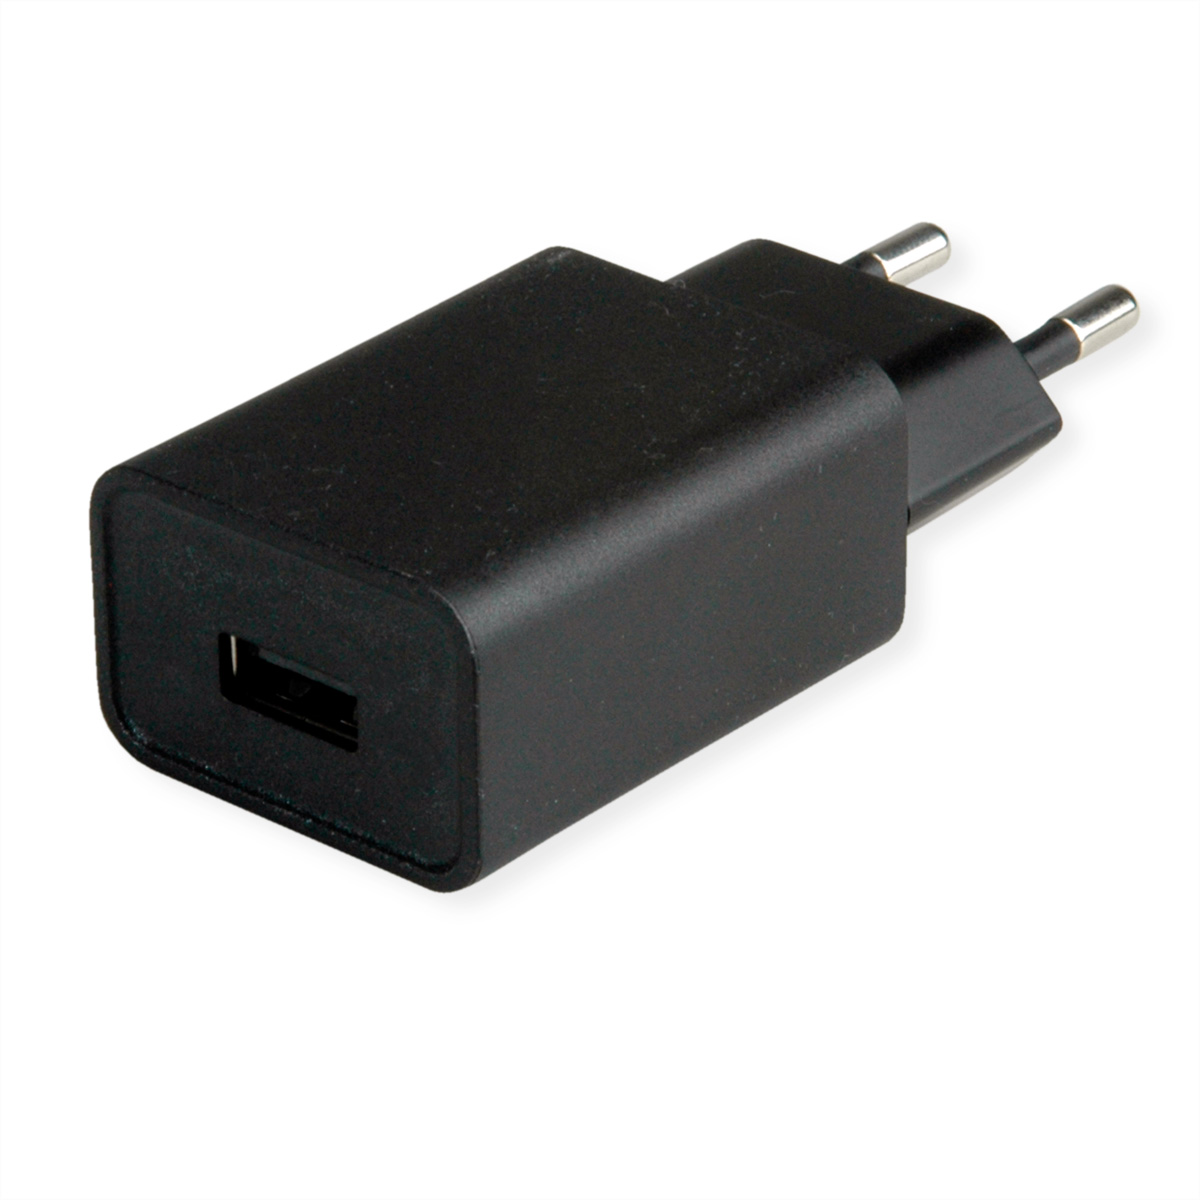 VALUE USB Charger mit Euro-Stecker, 1-Port, 12W